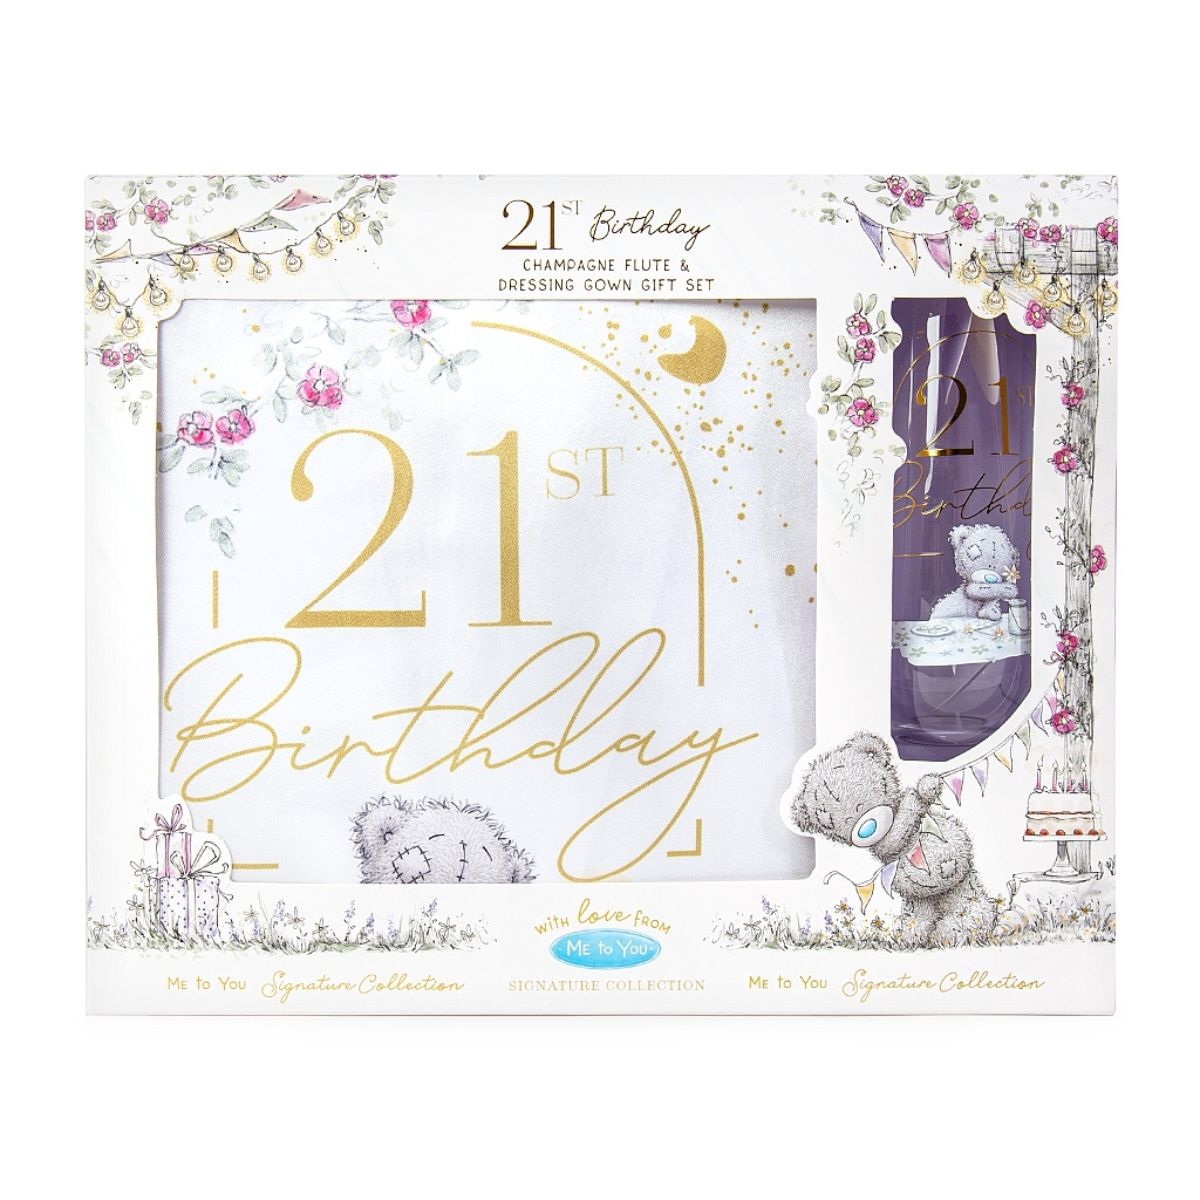 Age 21 Gift - 21st Me To You Signature Collection Dressing Gown & Flute Set